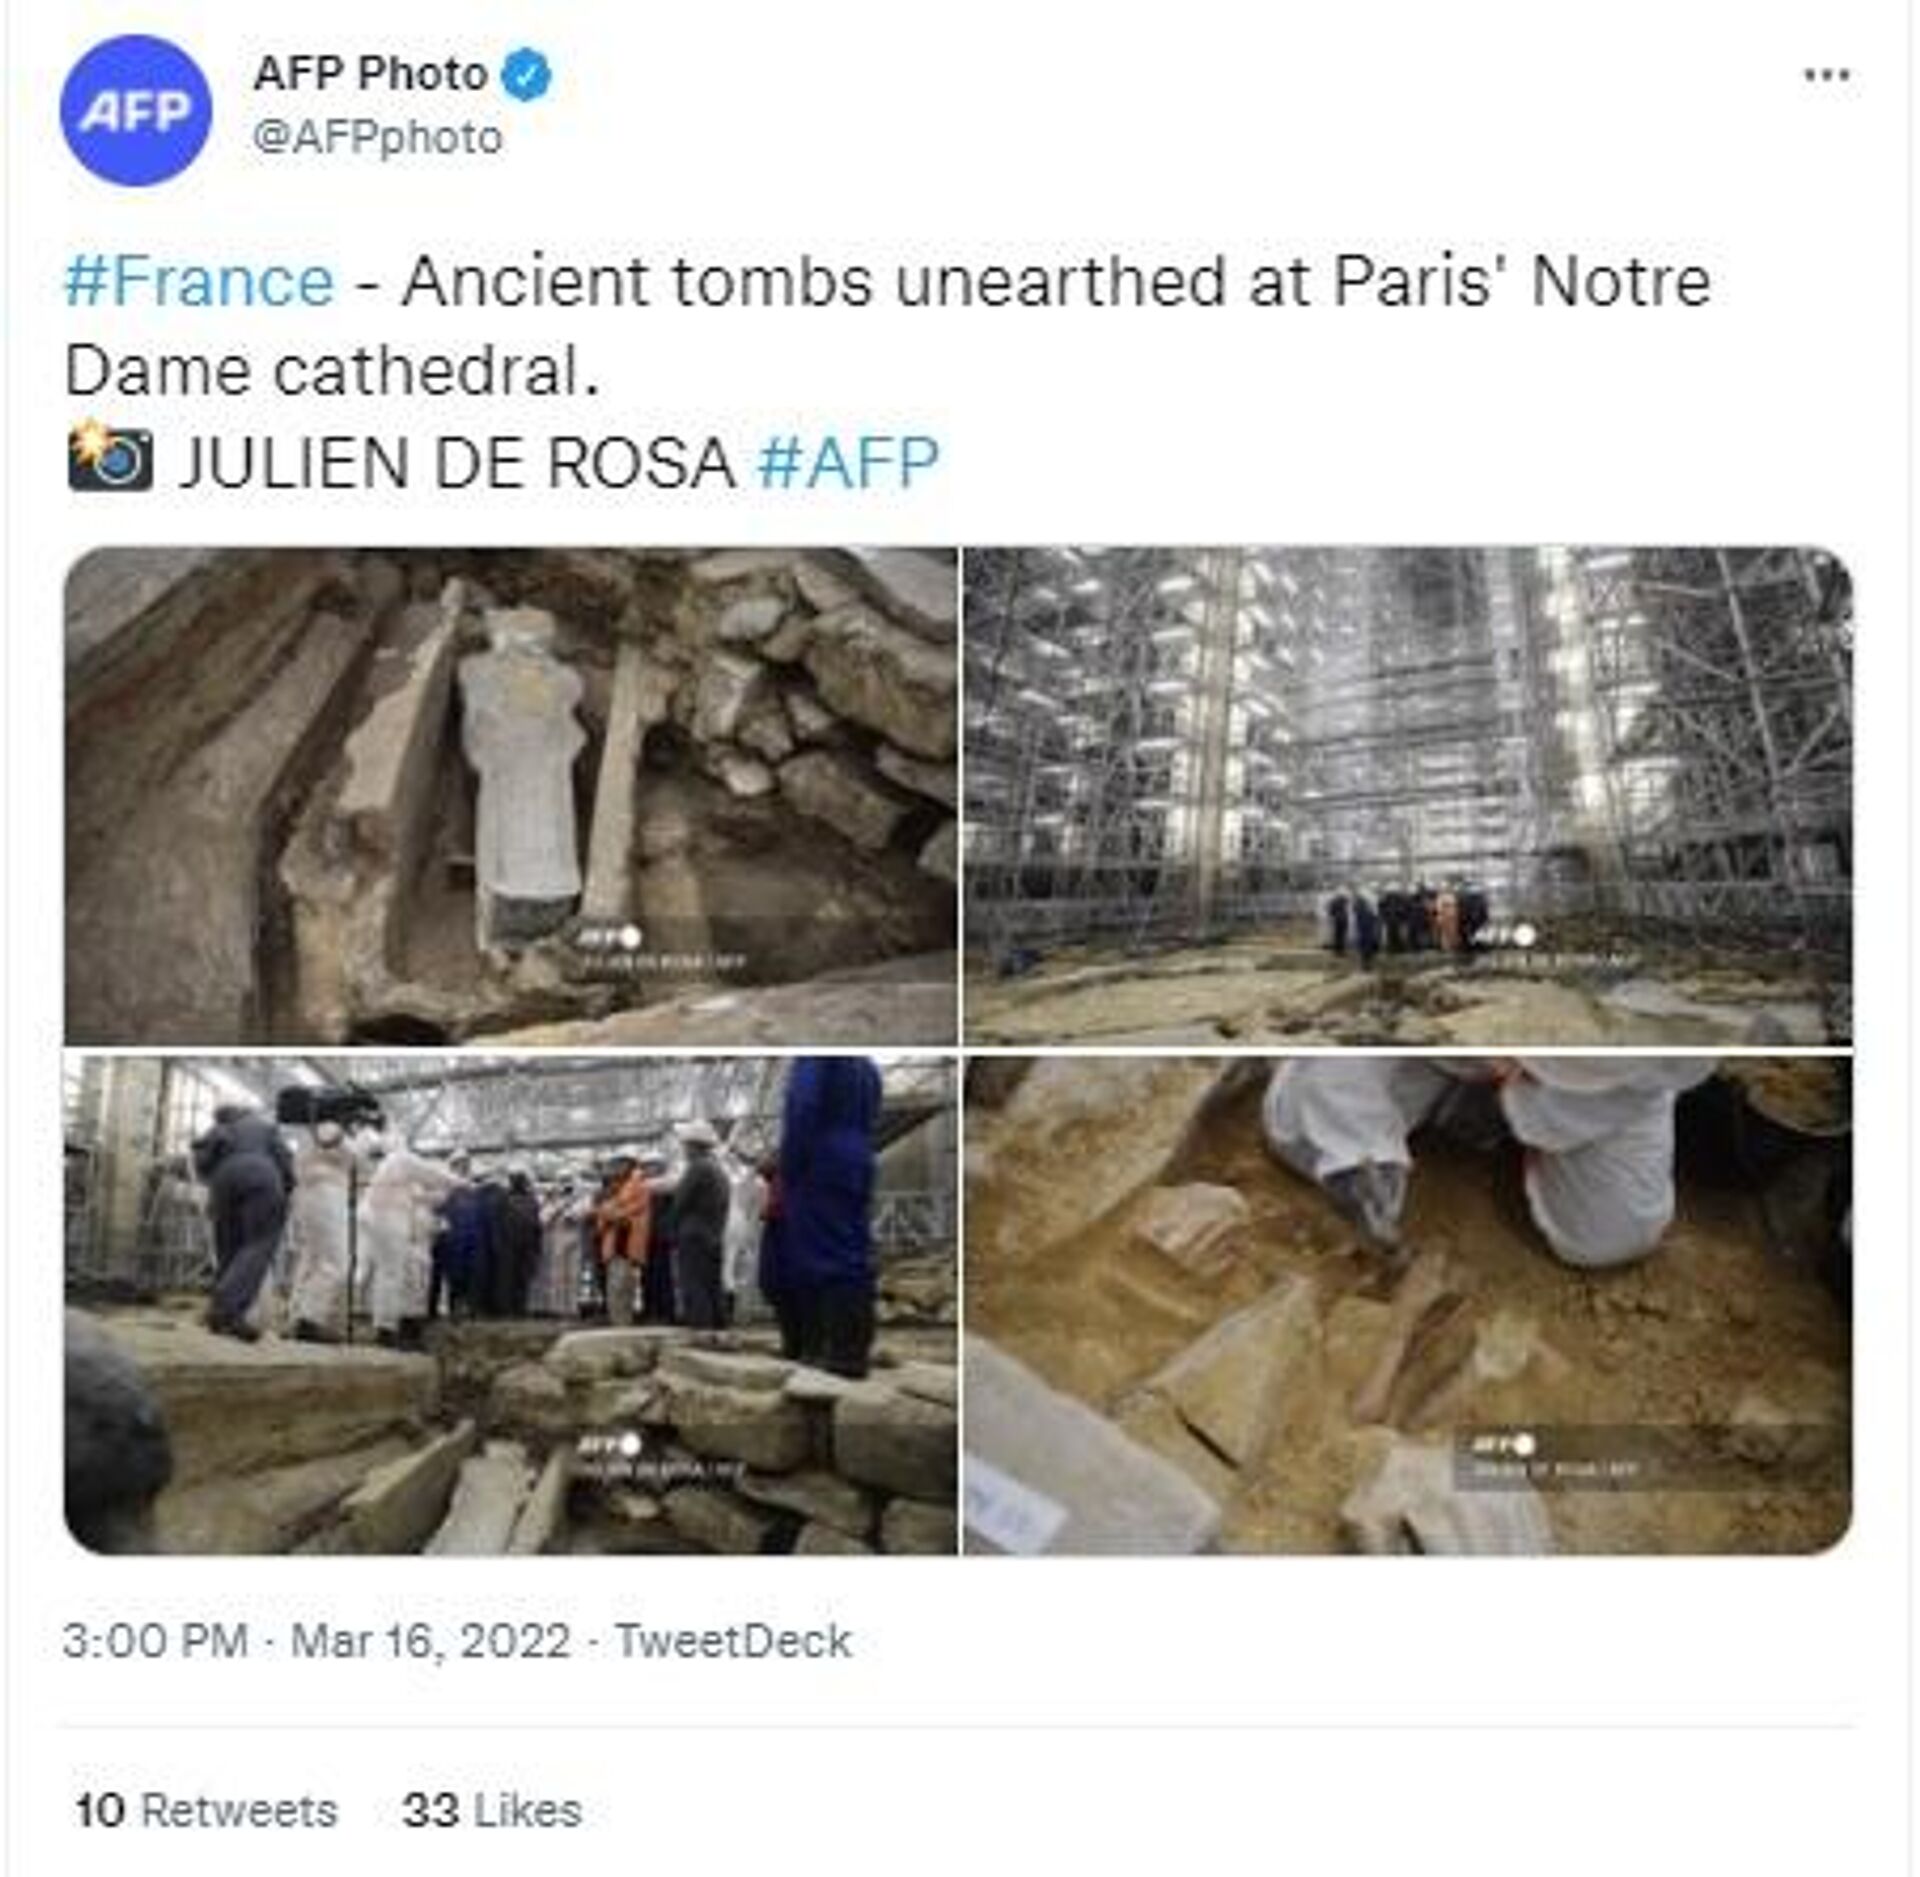 Pictures of ancient tombs unearthed at Paris' Notre-Dame Cathedral  - Sputnik International, 1920, 16.03.2022